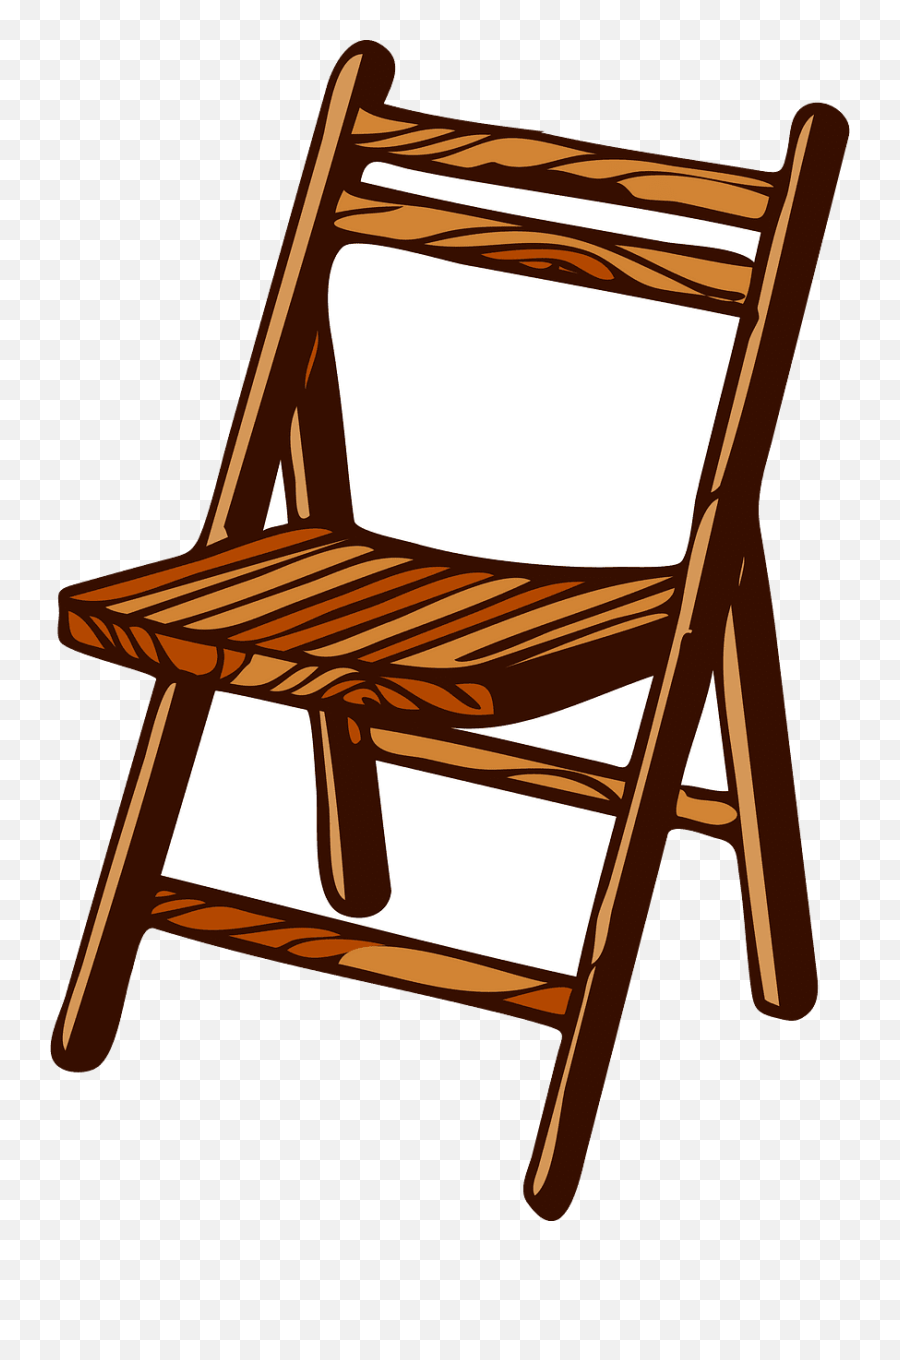 Wood - Chairclipart1jpg 402594 Round Wicker Chair Clipart Wooden Chair Emoji,Chair Clipart